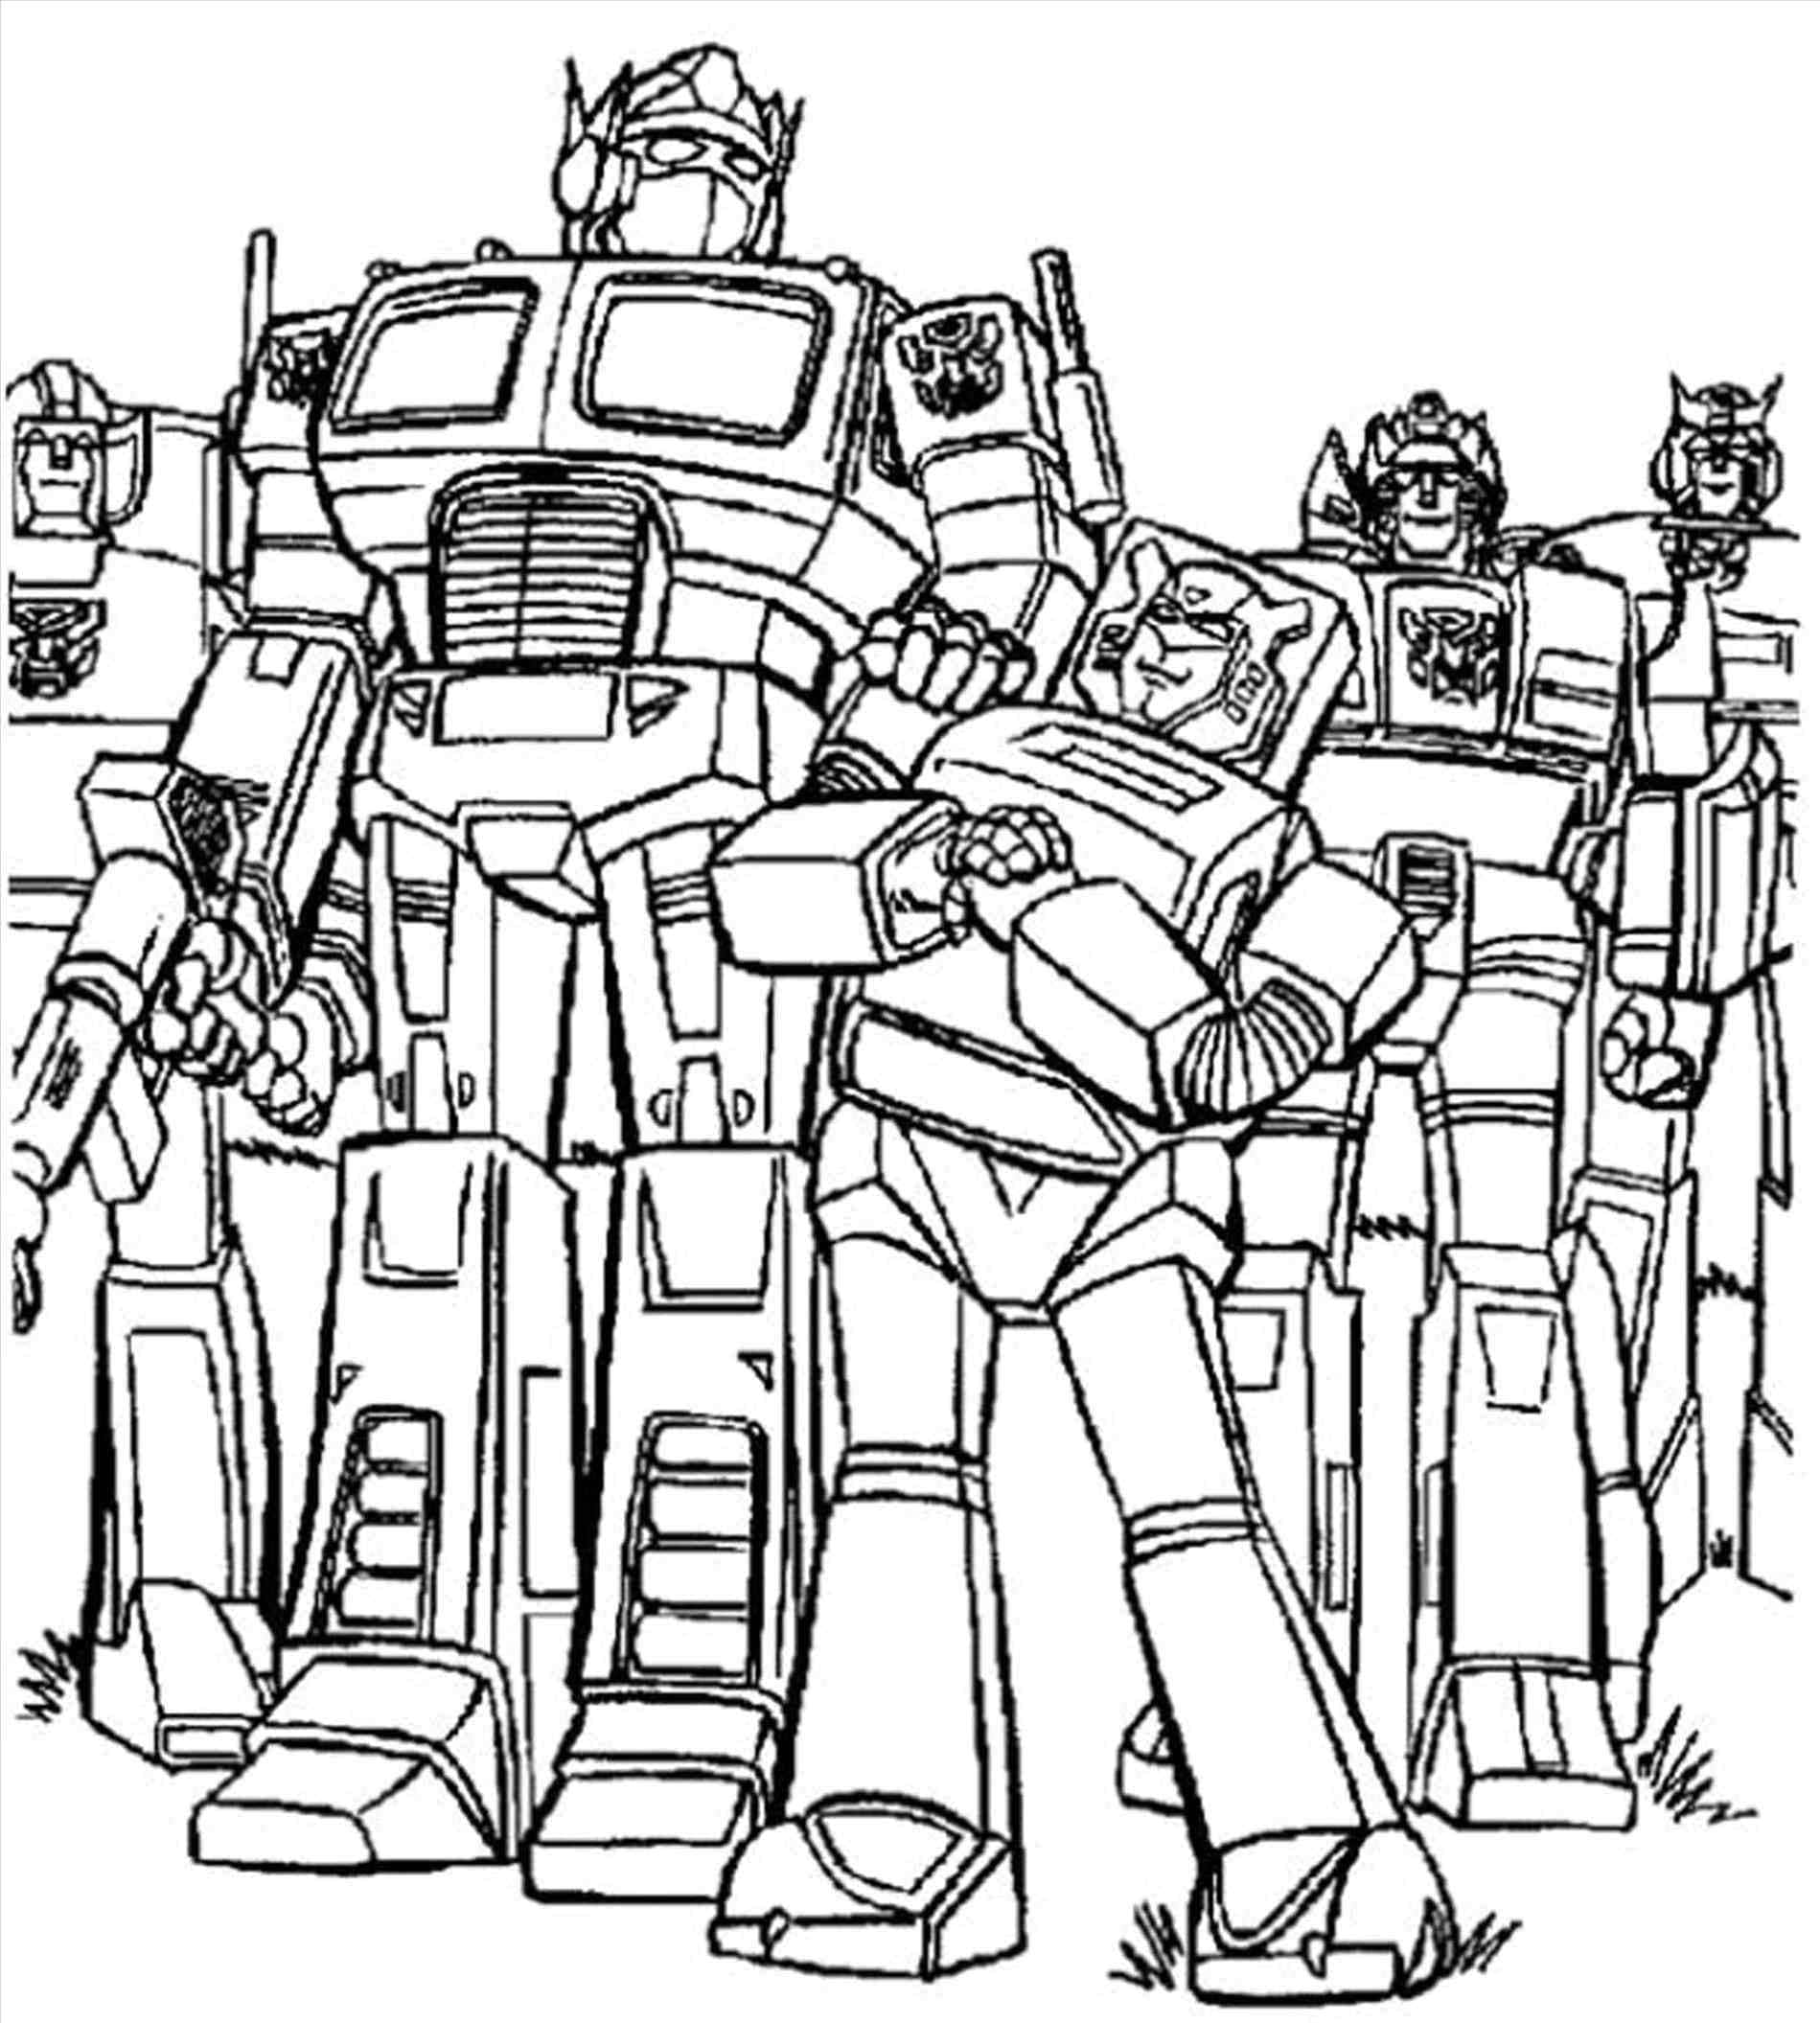 Coloring pages Robots. Print for free for boys, 100 images